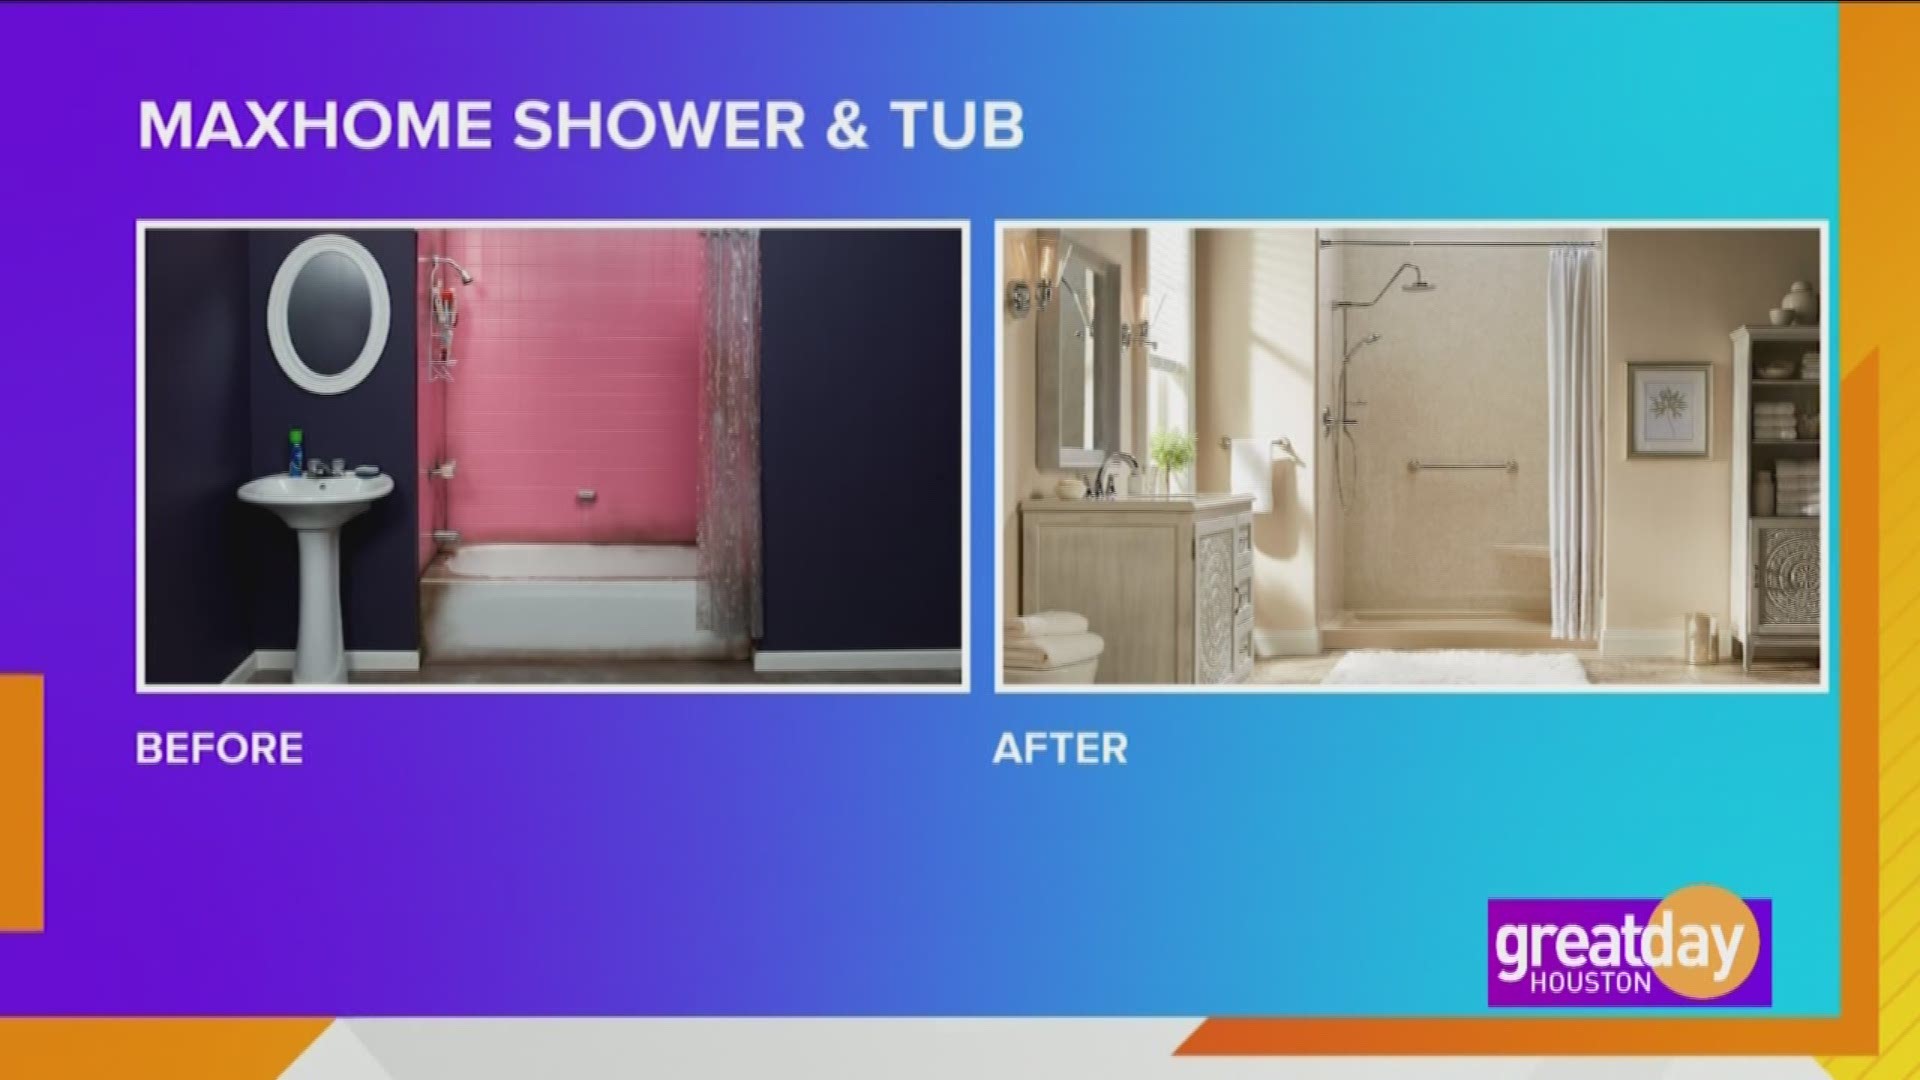 Larry Closs with MaxHome explains how you can get a new luxurious bath or shower in as little as one day.